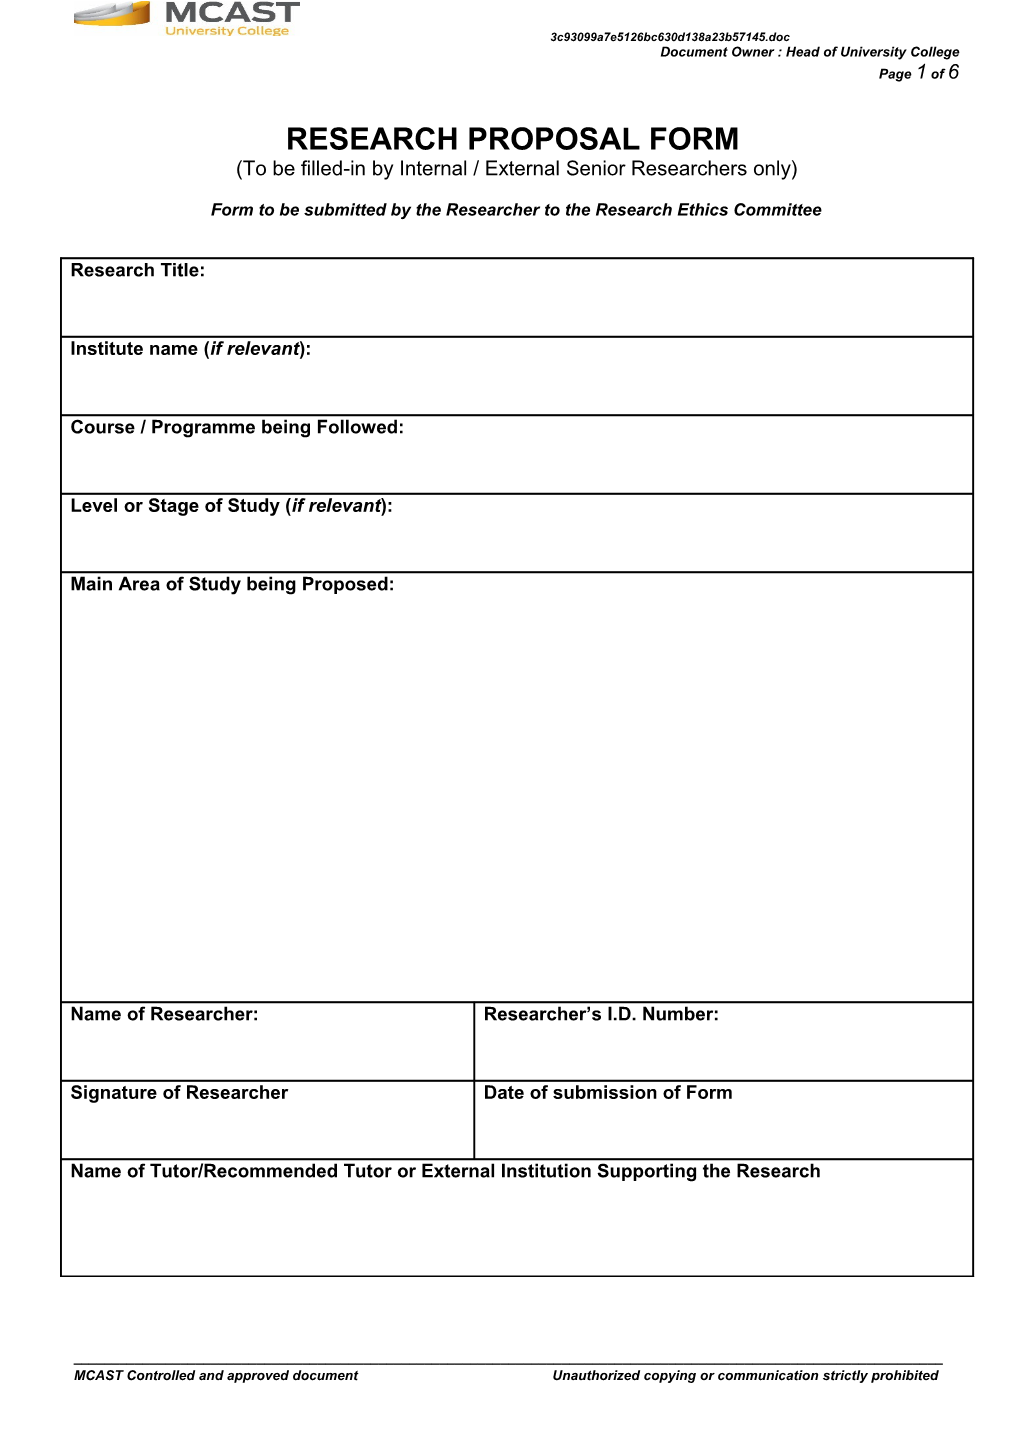 Form to Be Submitted by the Researcher to the Research Ethics Committee